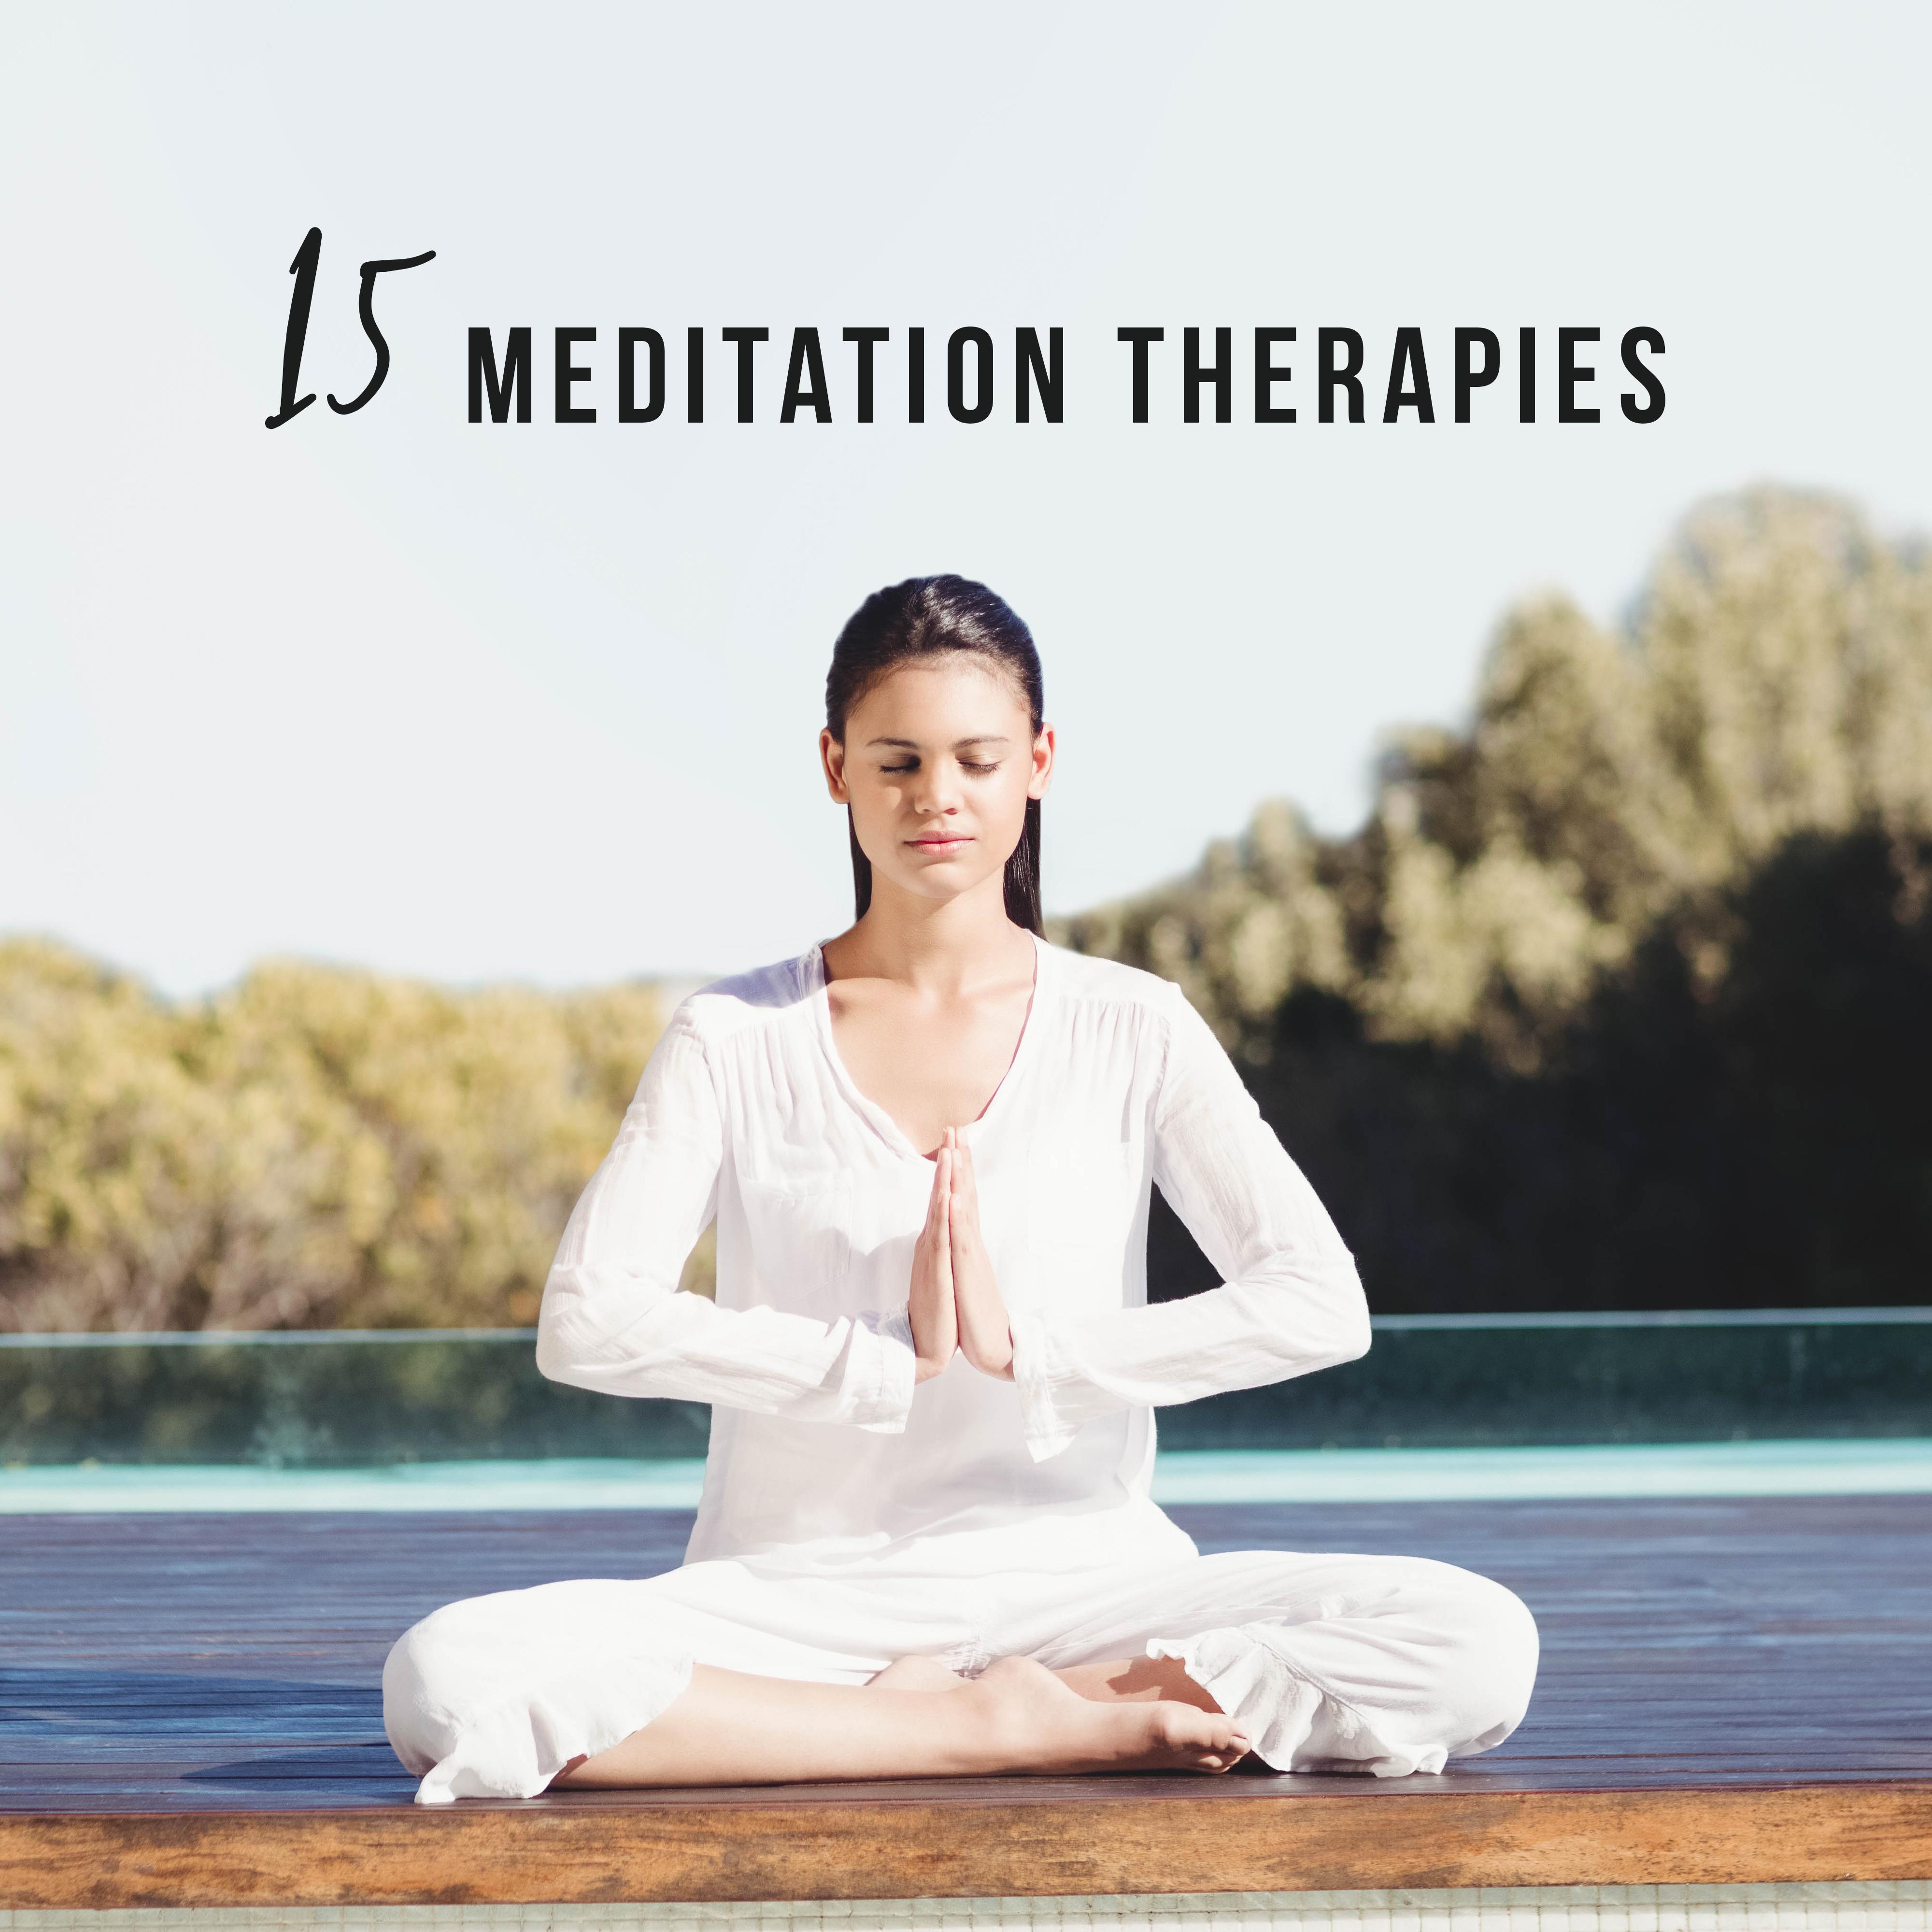 15 Meditation Therapies: New Age 2019 Music Selection for Deep Yoga & Inner Relaxation, Chakra Opening and Healing, Improve Connection Between Body & Mind, Zen, Mantra